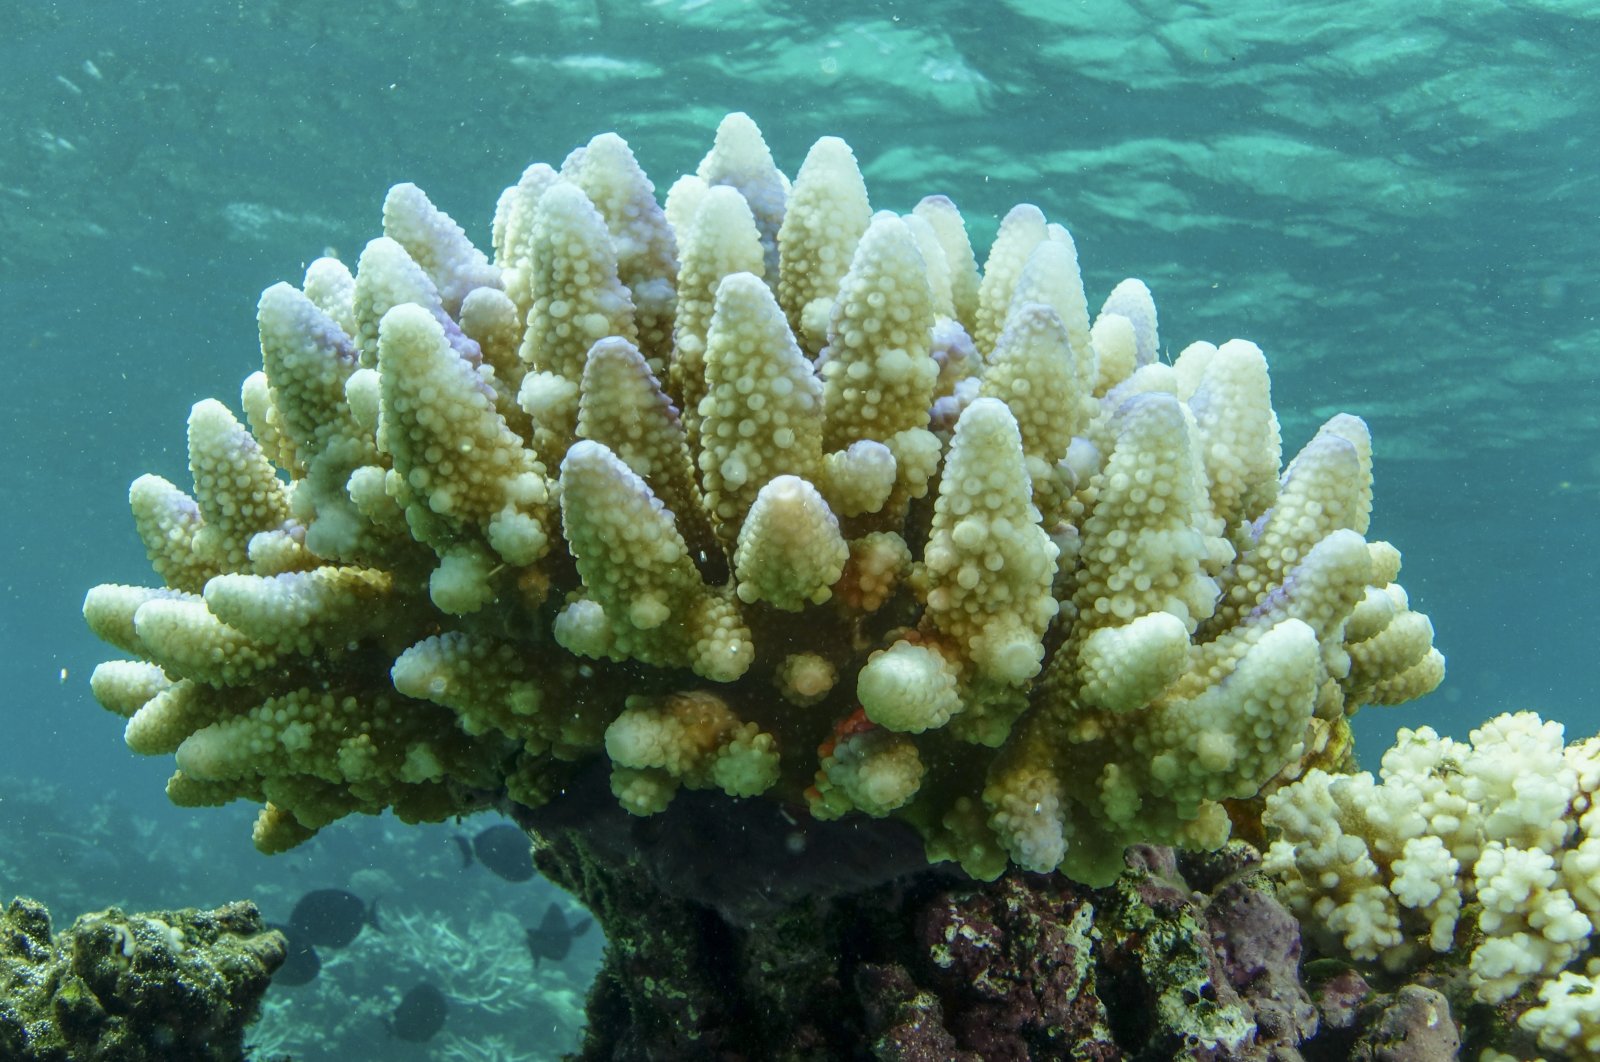 This photo supplied by the Great Barrier Reef Marine Park Authority (GBRMPA) shows a reef scape of bleached coral in the Townsville/Whitsunday management area of the Great Barrier Reef, Australia, March 15, 2015. (AP Photo)